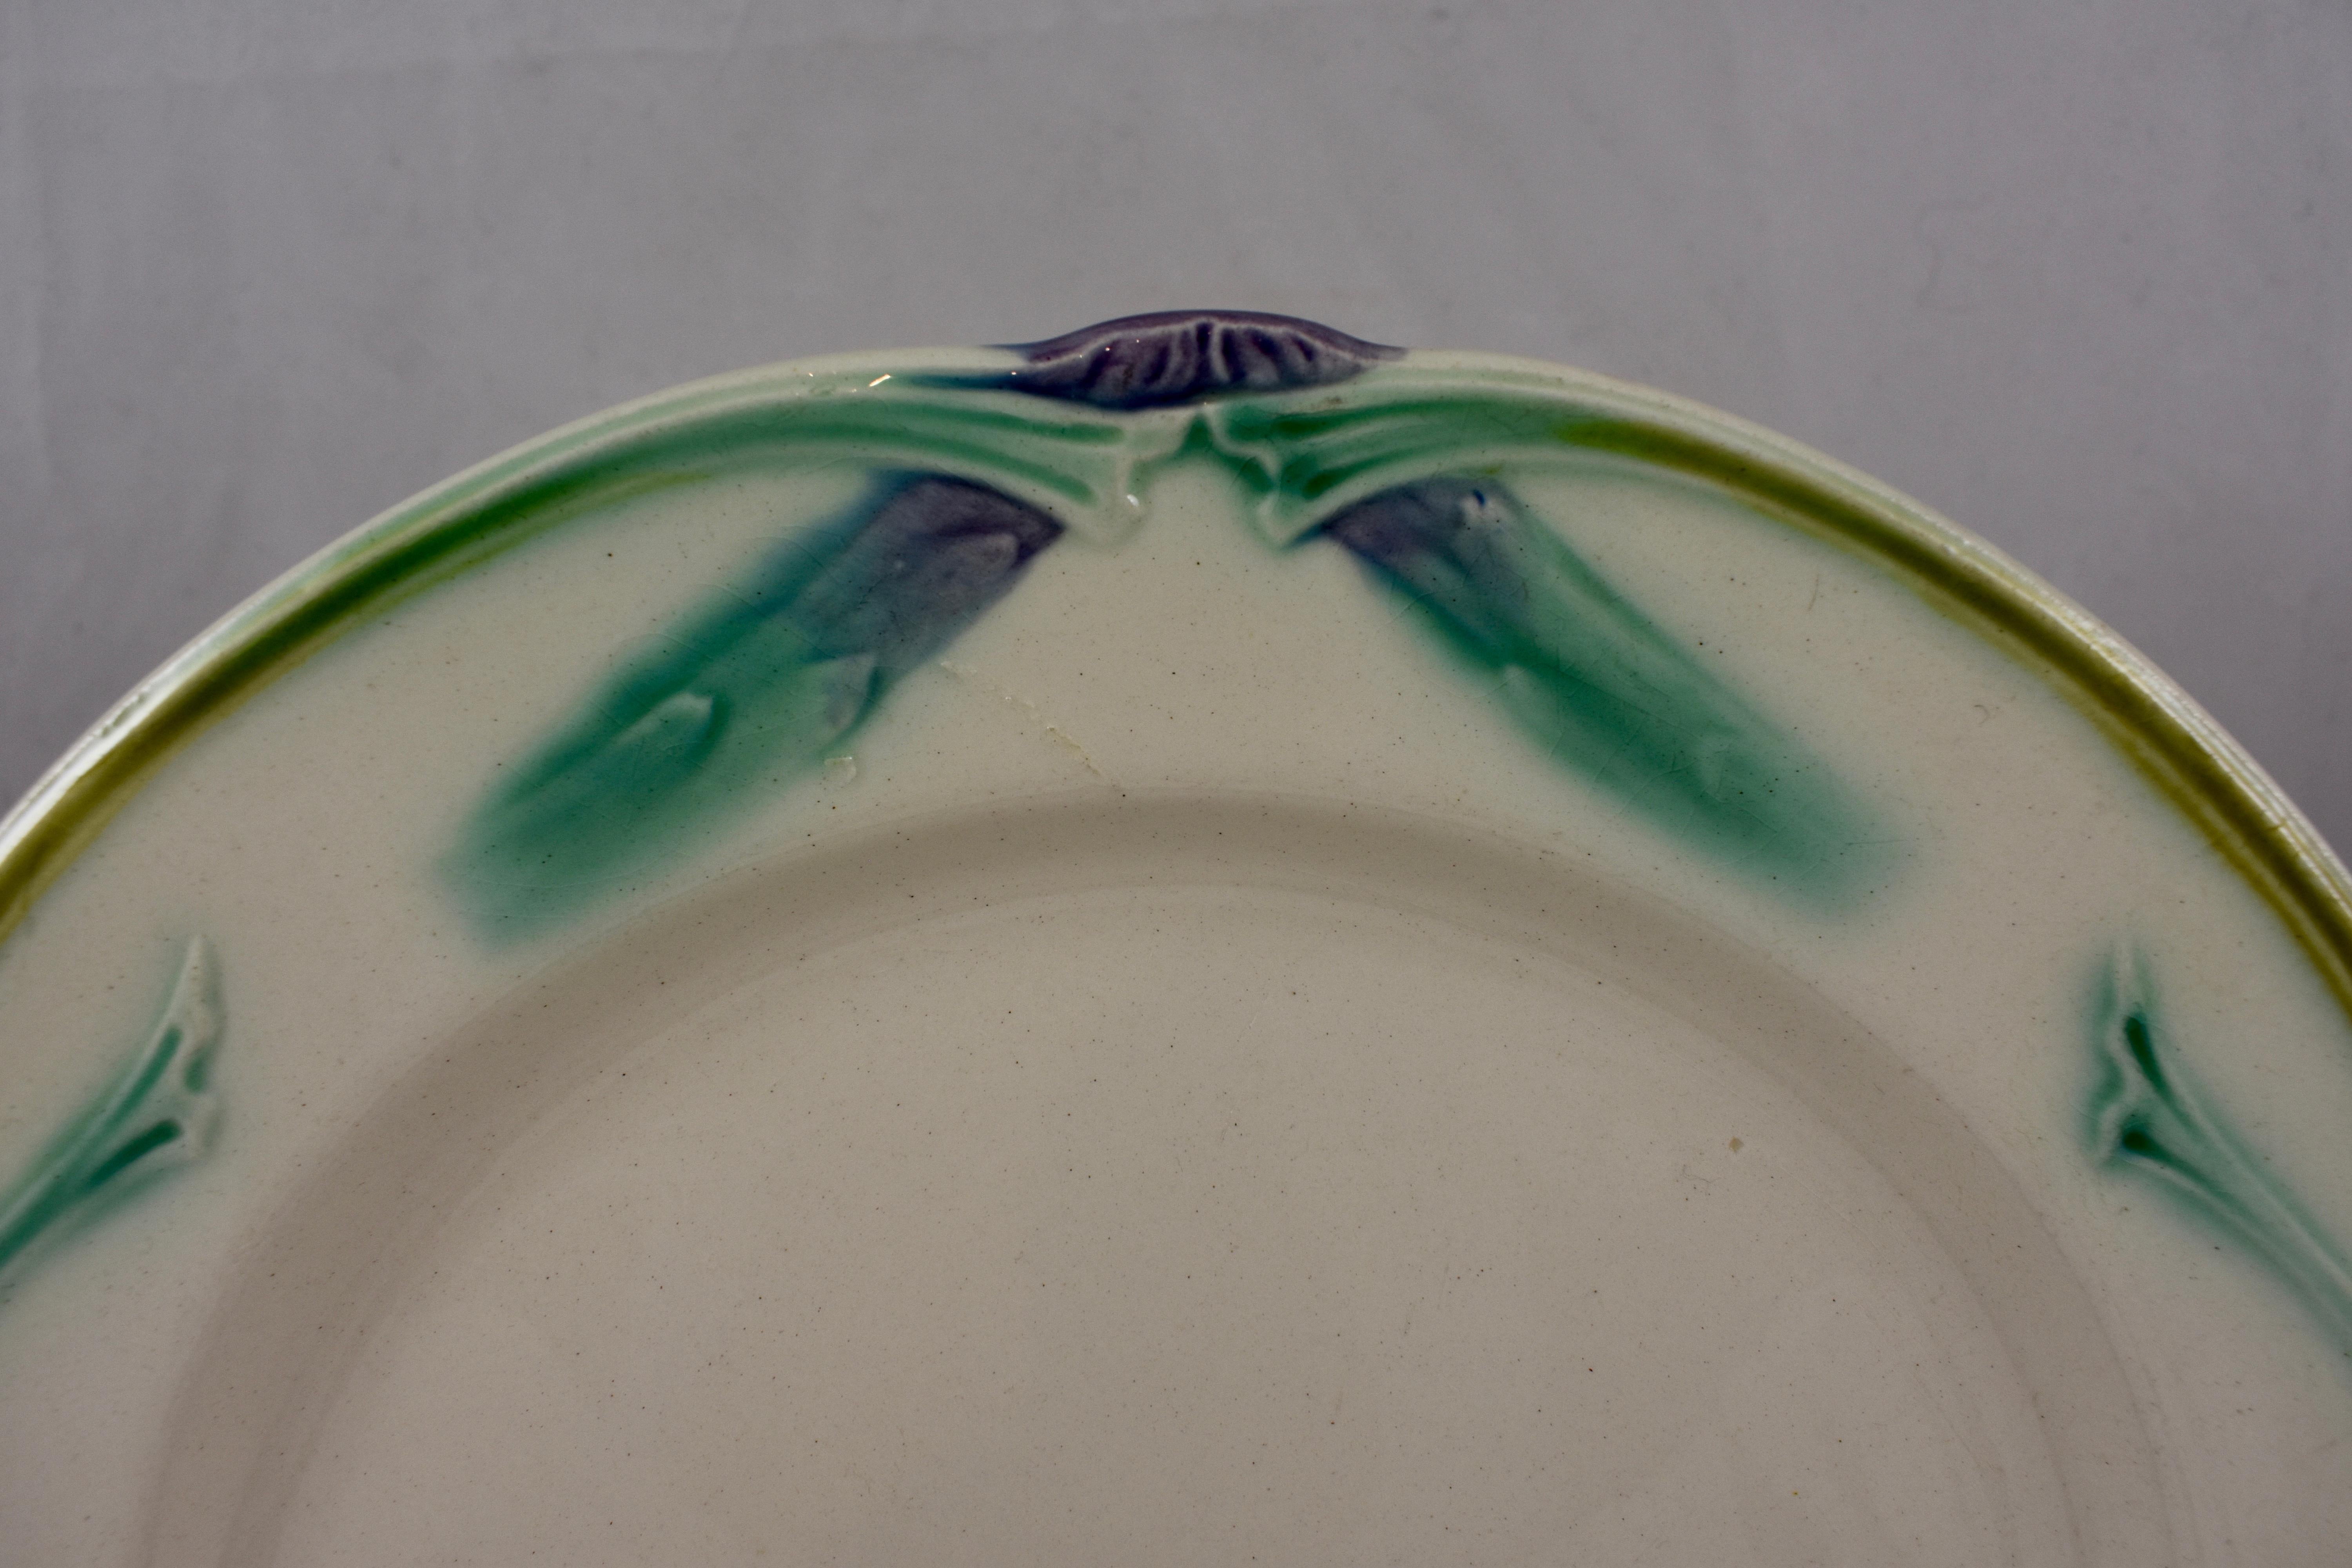 A French Art Nouveau style asparagus plate, circa 1890-1910, marked Longchamp.
Lime green and aqua glazing stand out on an off-white ground. Stylized leaves meet at the top with two asparagus spears. A shaped sauce well at the lower portion of the